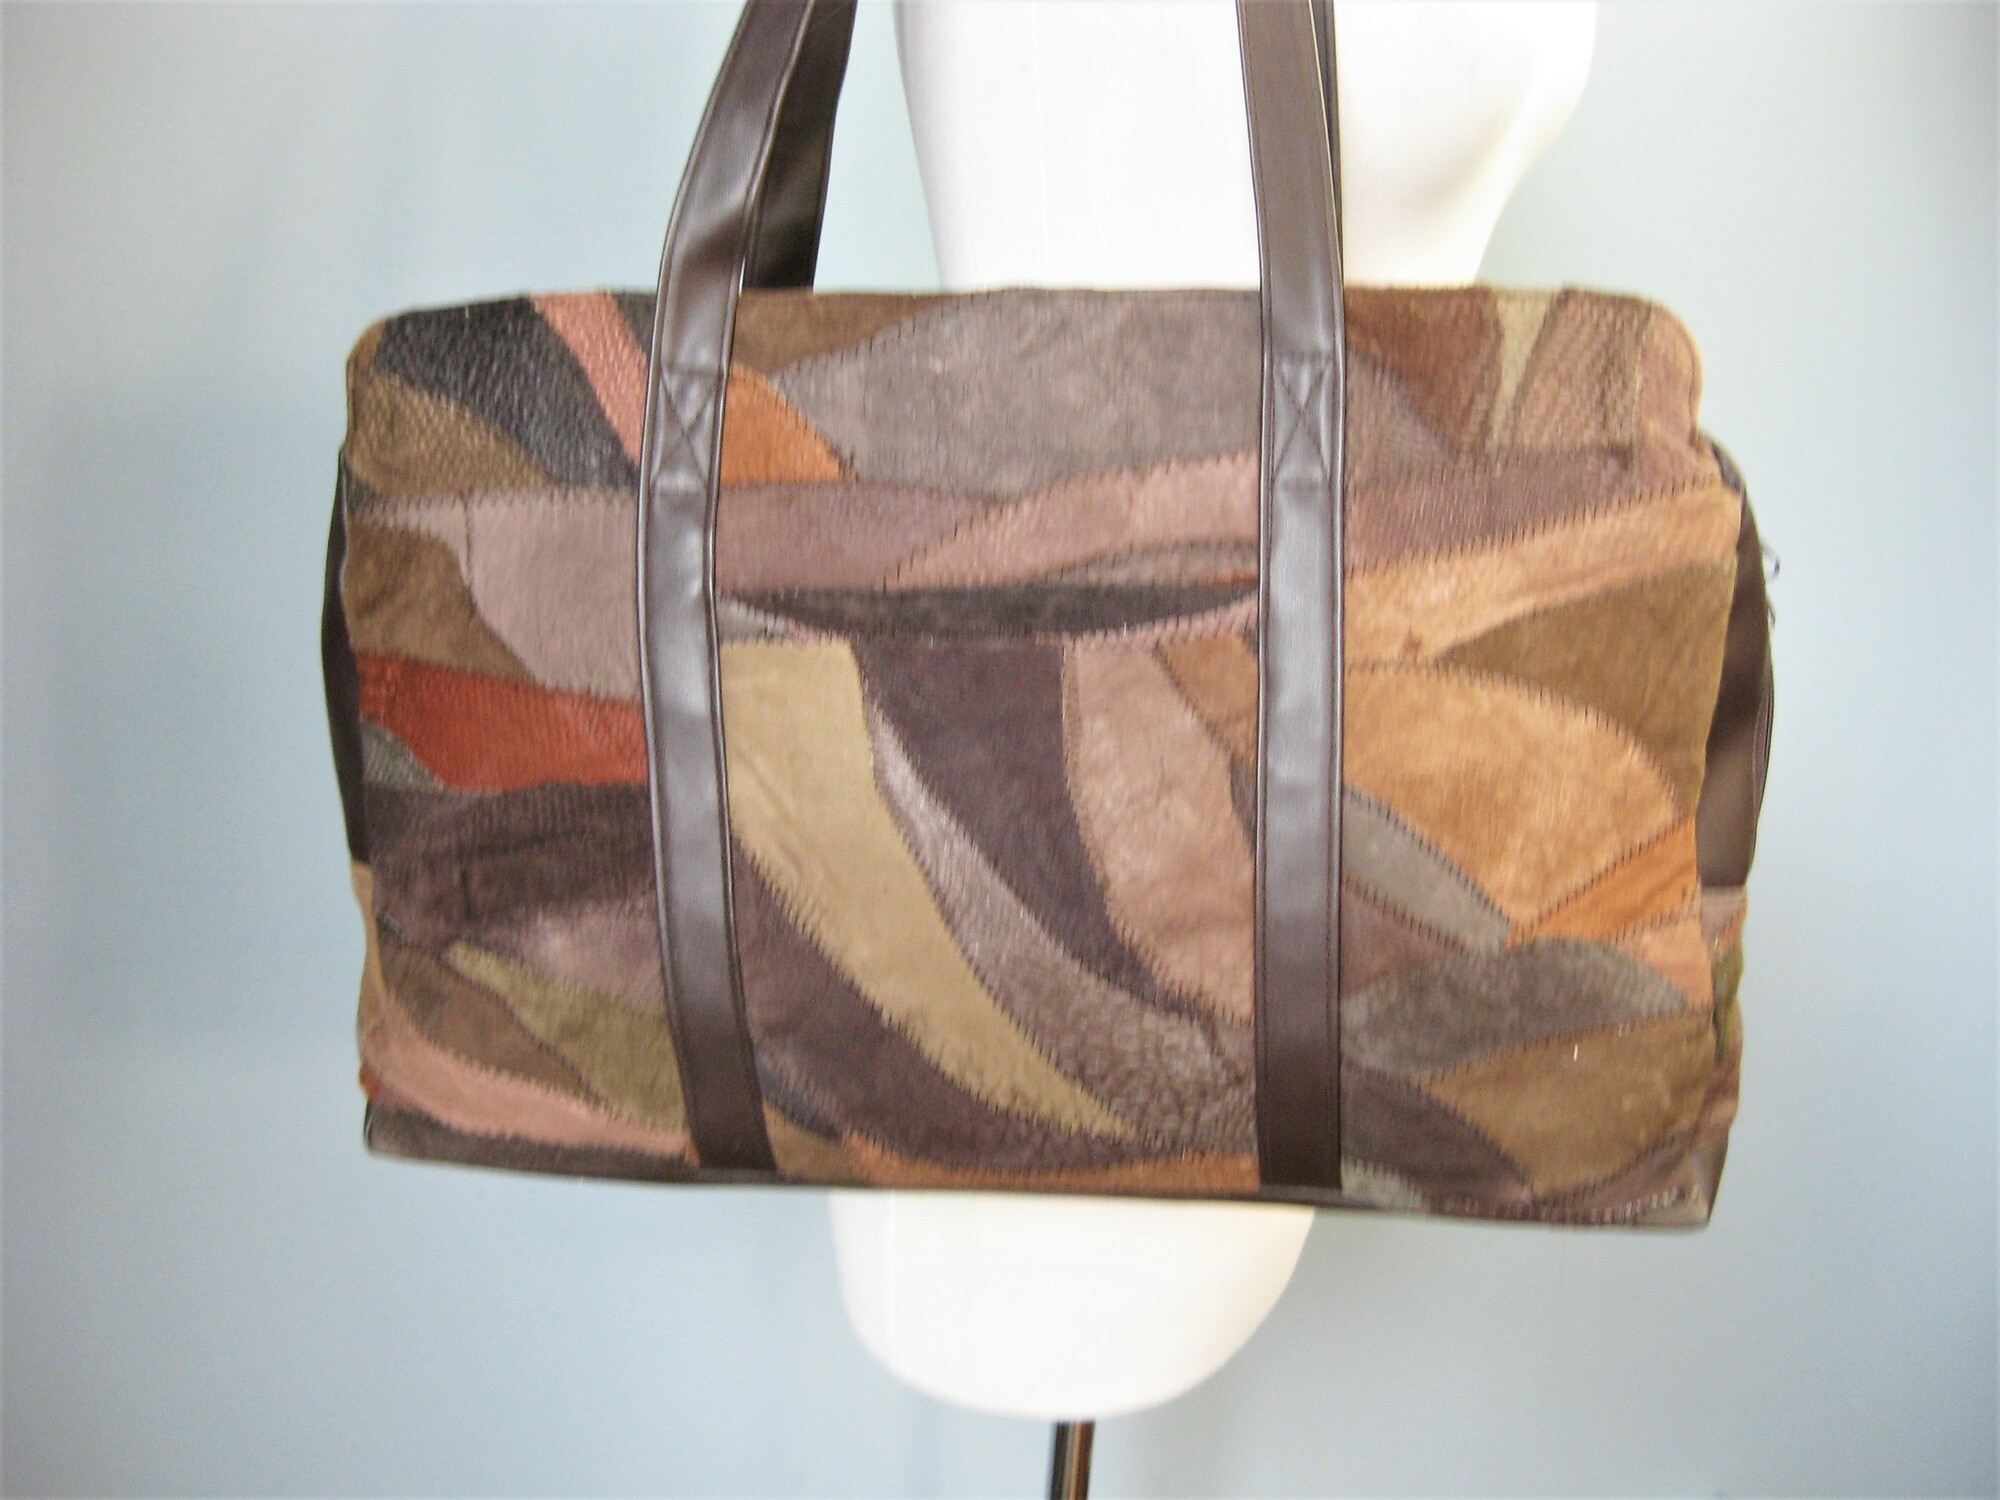 Big rectangular patchwork suede shoulder bag with two handles.
Super 70s look but I am not sure it is quite that old....
vinyl trim
The zipper goes across the top and wraps about halfway down each side, this makes it so much easier to work with and the zipper has two pulls which I really like too.
Fabric lining with two main compartments and a big center zippered compartment
There is also a slip pocket on the outside
No brand label
Excellent vintage condition!
W: 17.5
H: 12
Depth: 3.25
HD: 11

Thanks for looking!
#43535